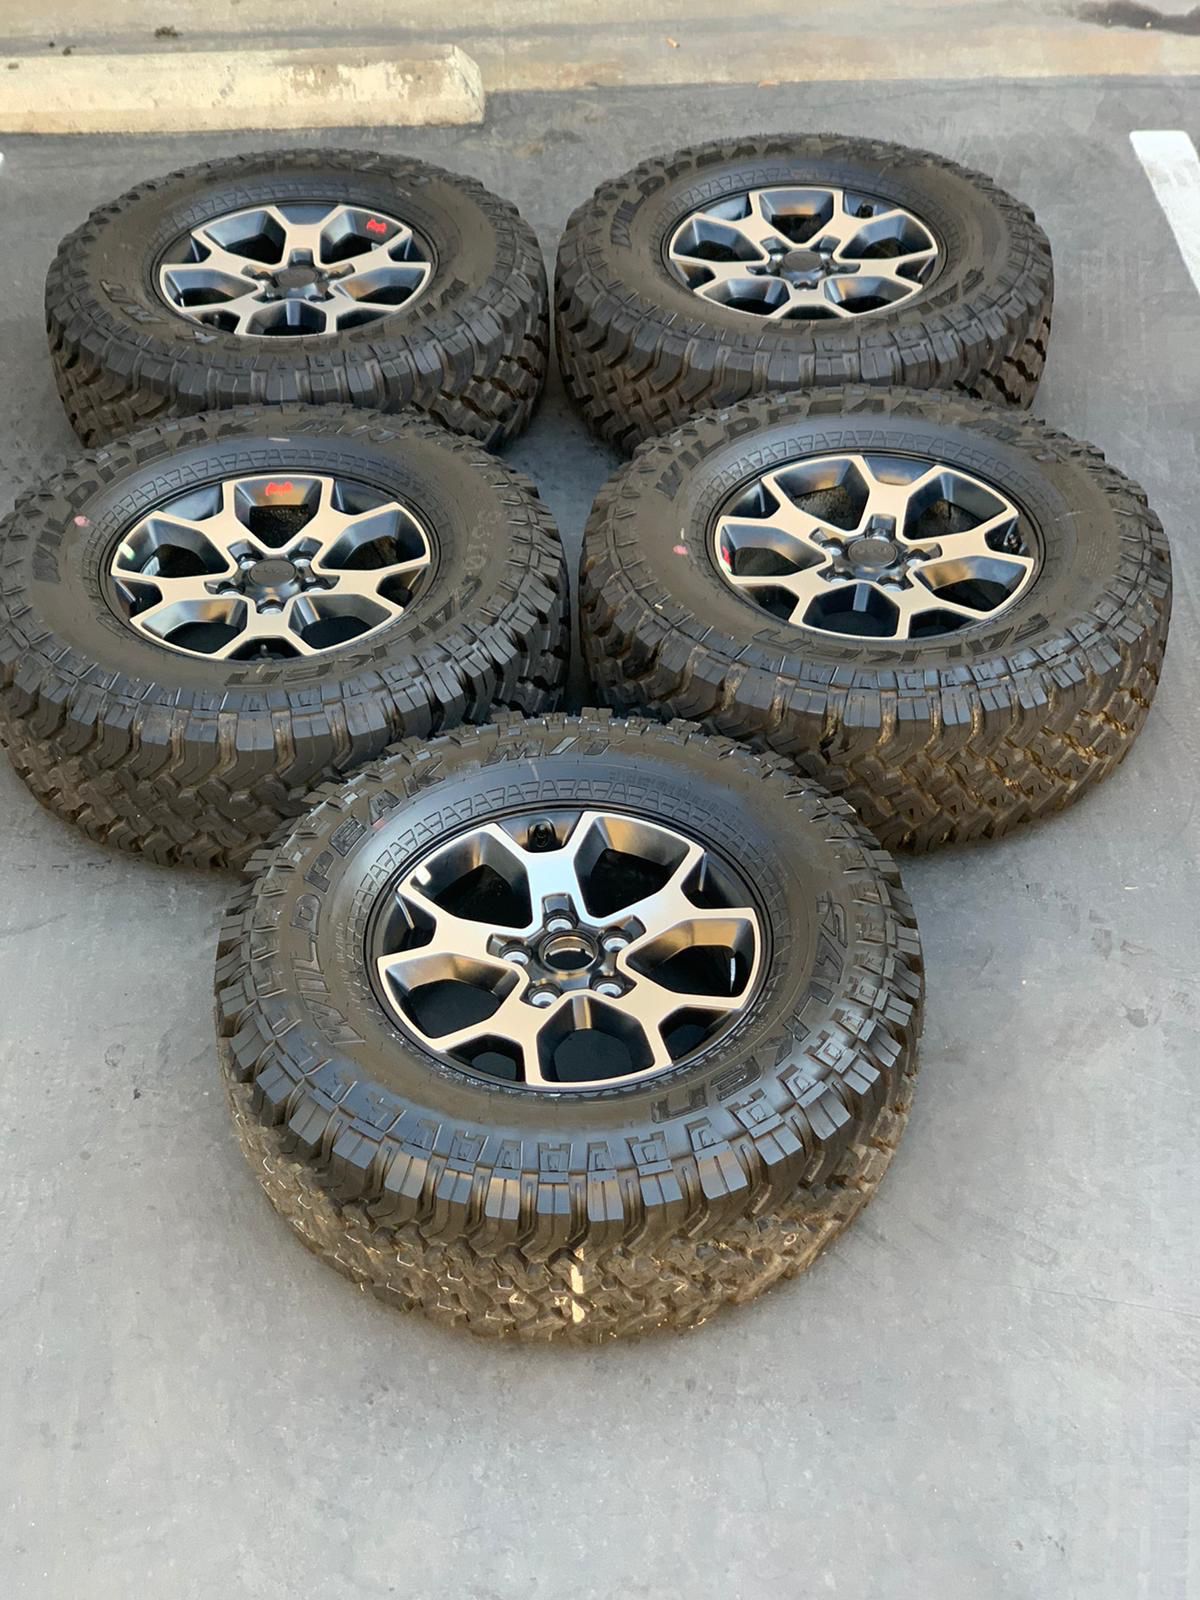 17” Jeep Wrangler Rubicon brand new wheels and tires